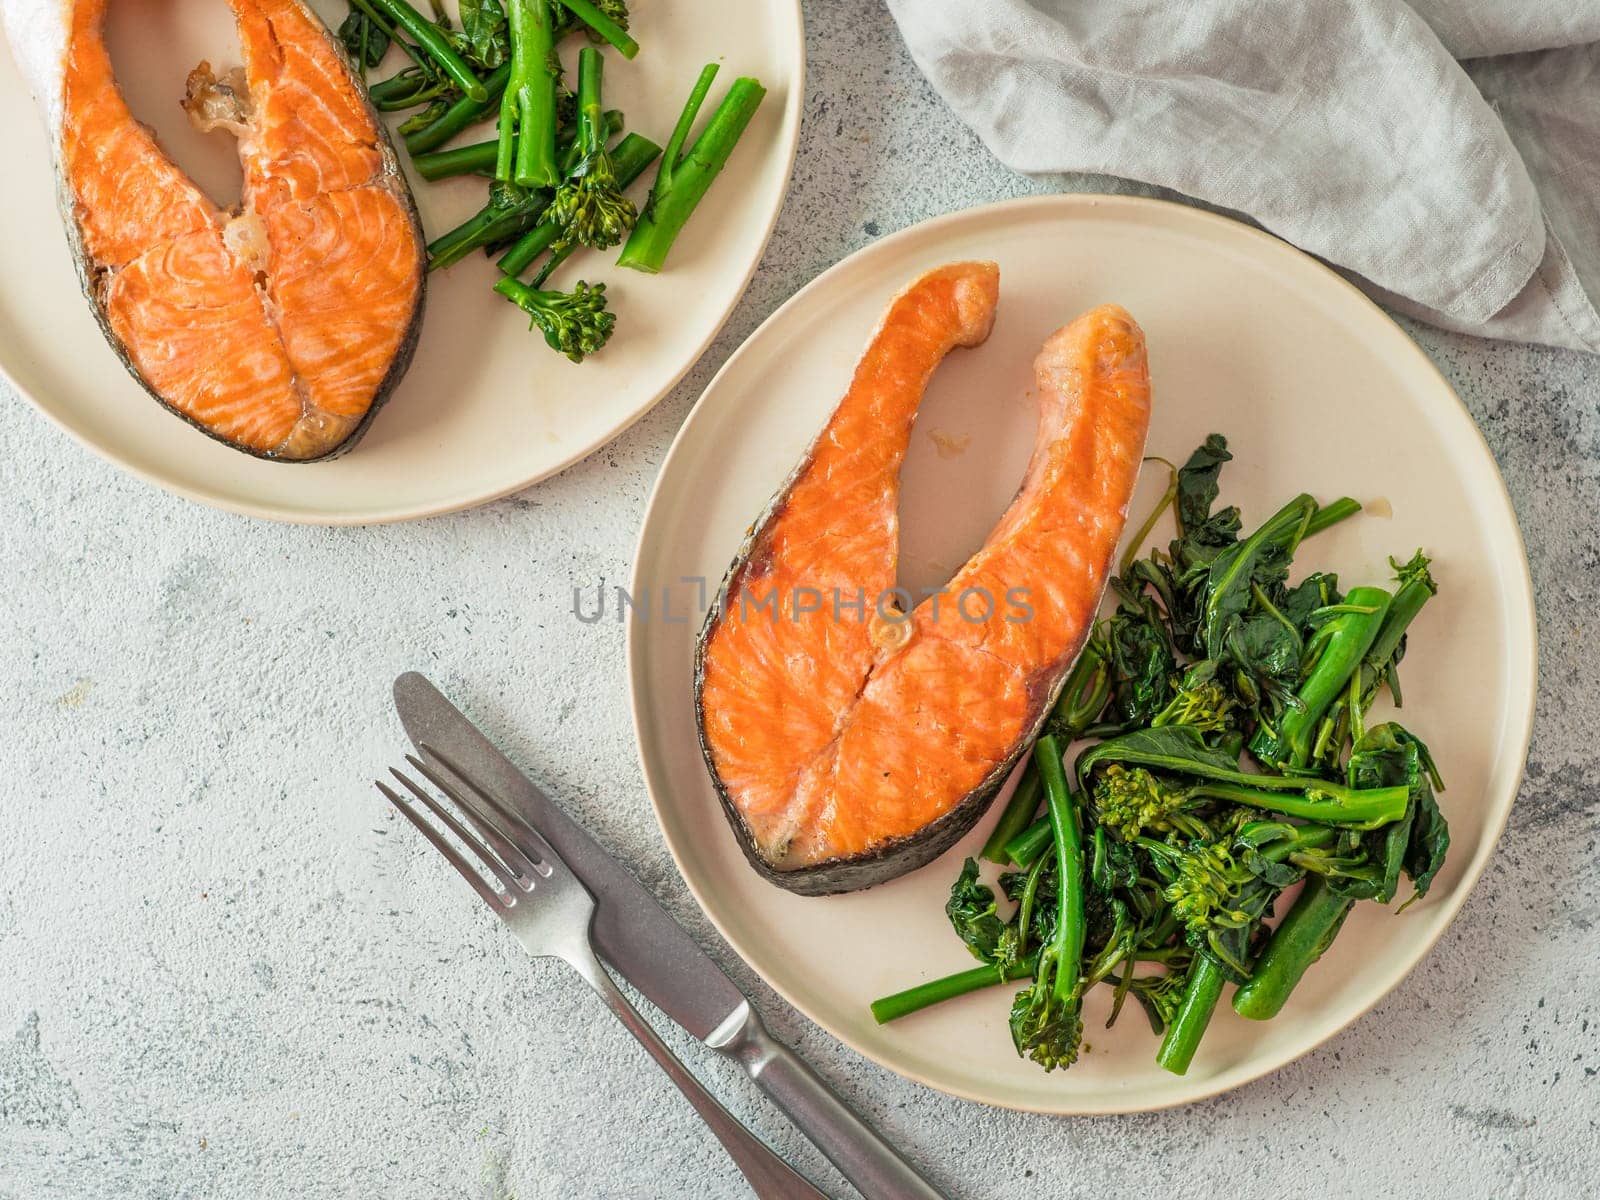 Ready-to-eat grilled salmon steak and greens by fascinadora